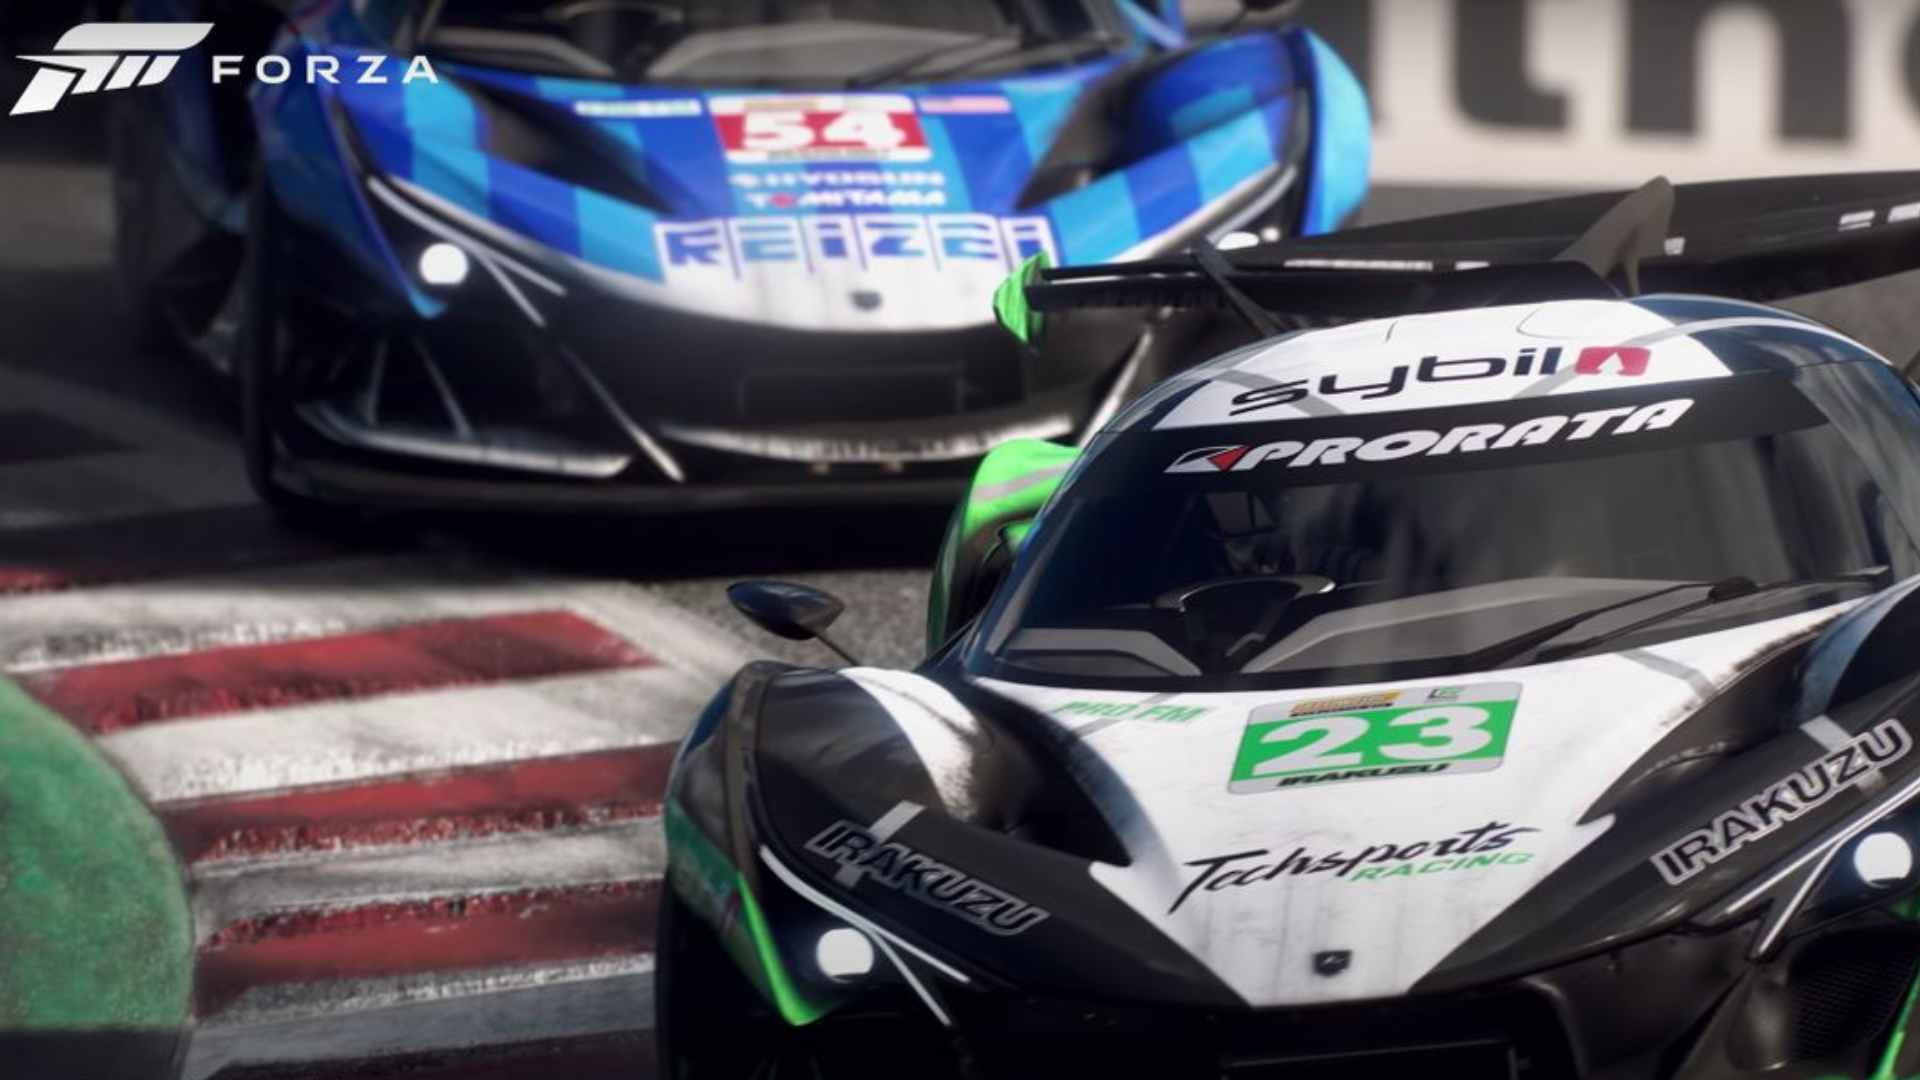 Forza Motorsport 6: Apex welcomes new cars and the legendary